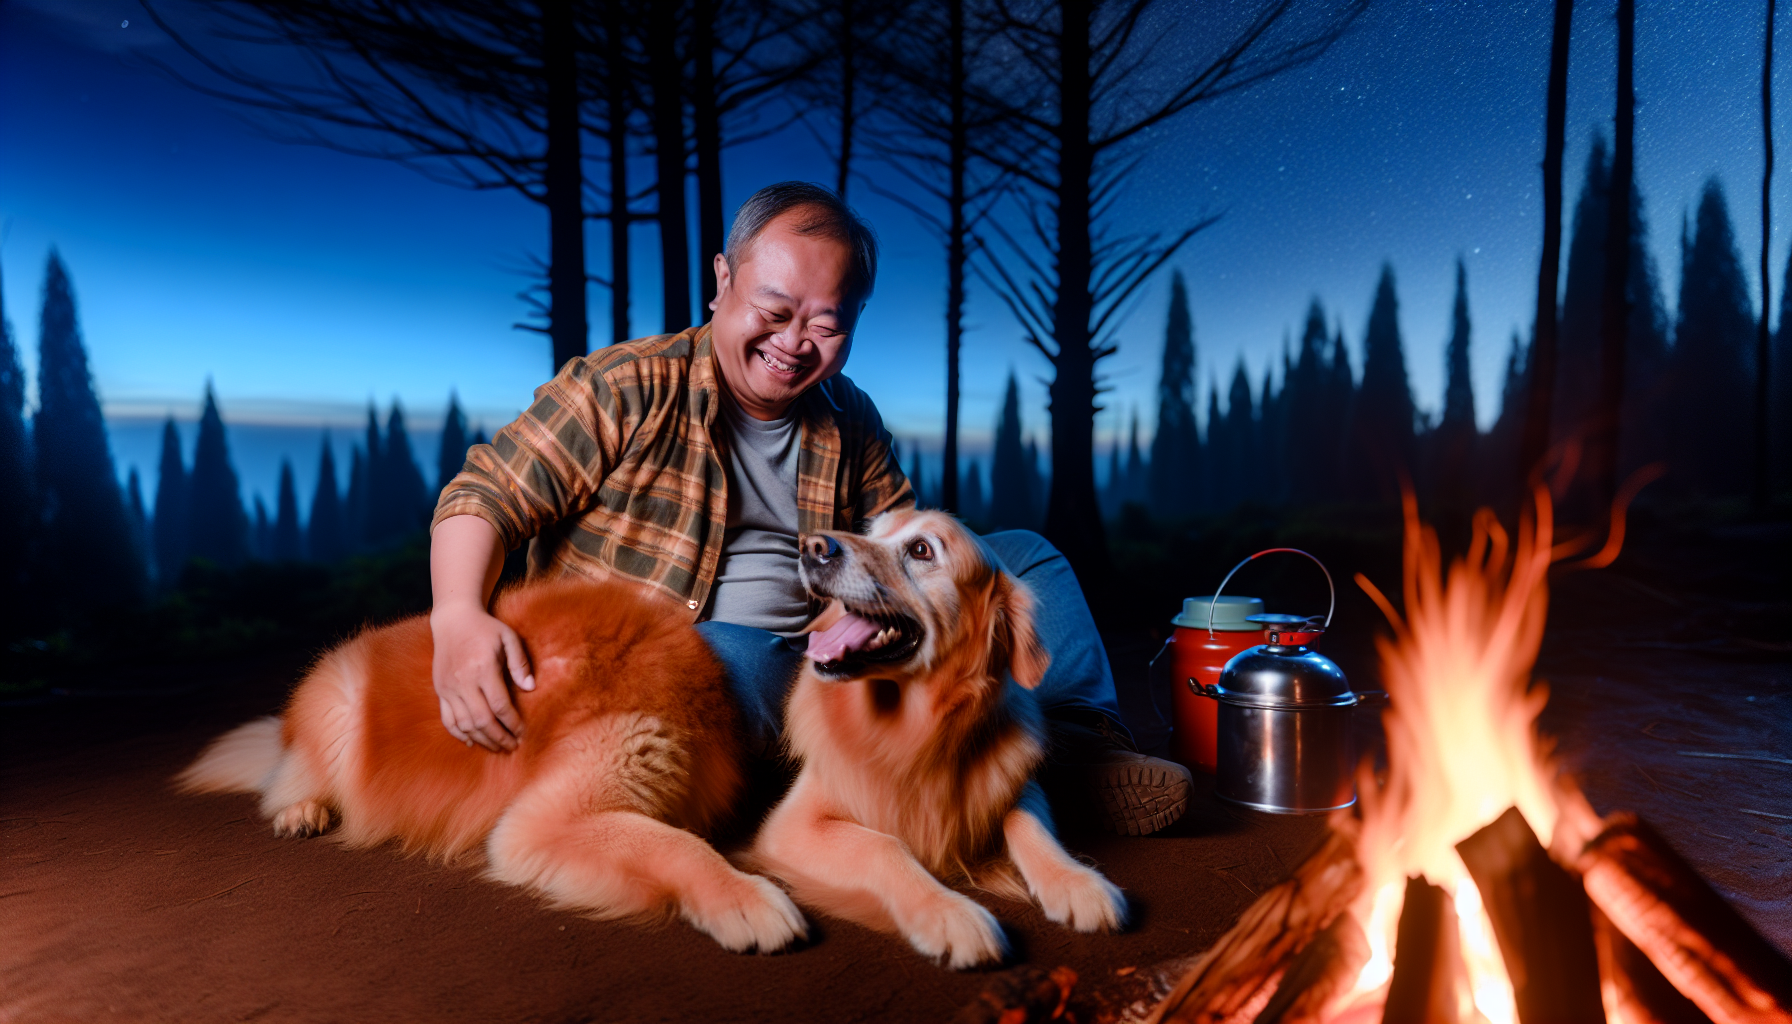 A dog and its owner sitting by a campfire in the wilderness